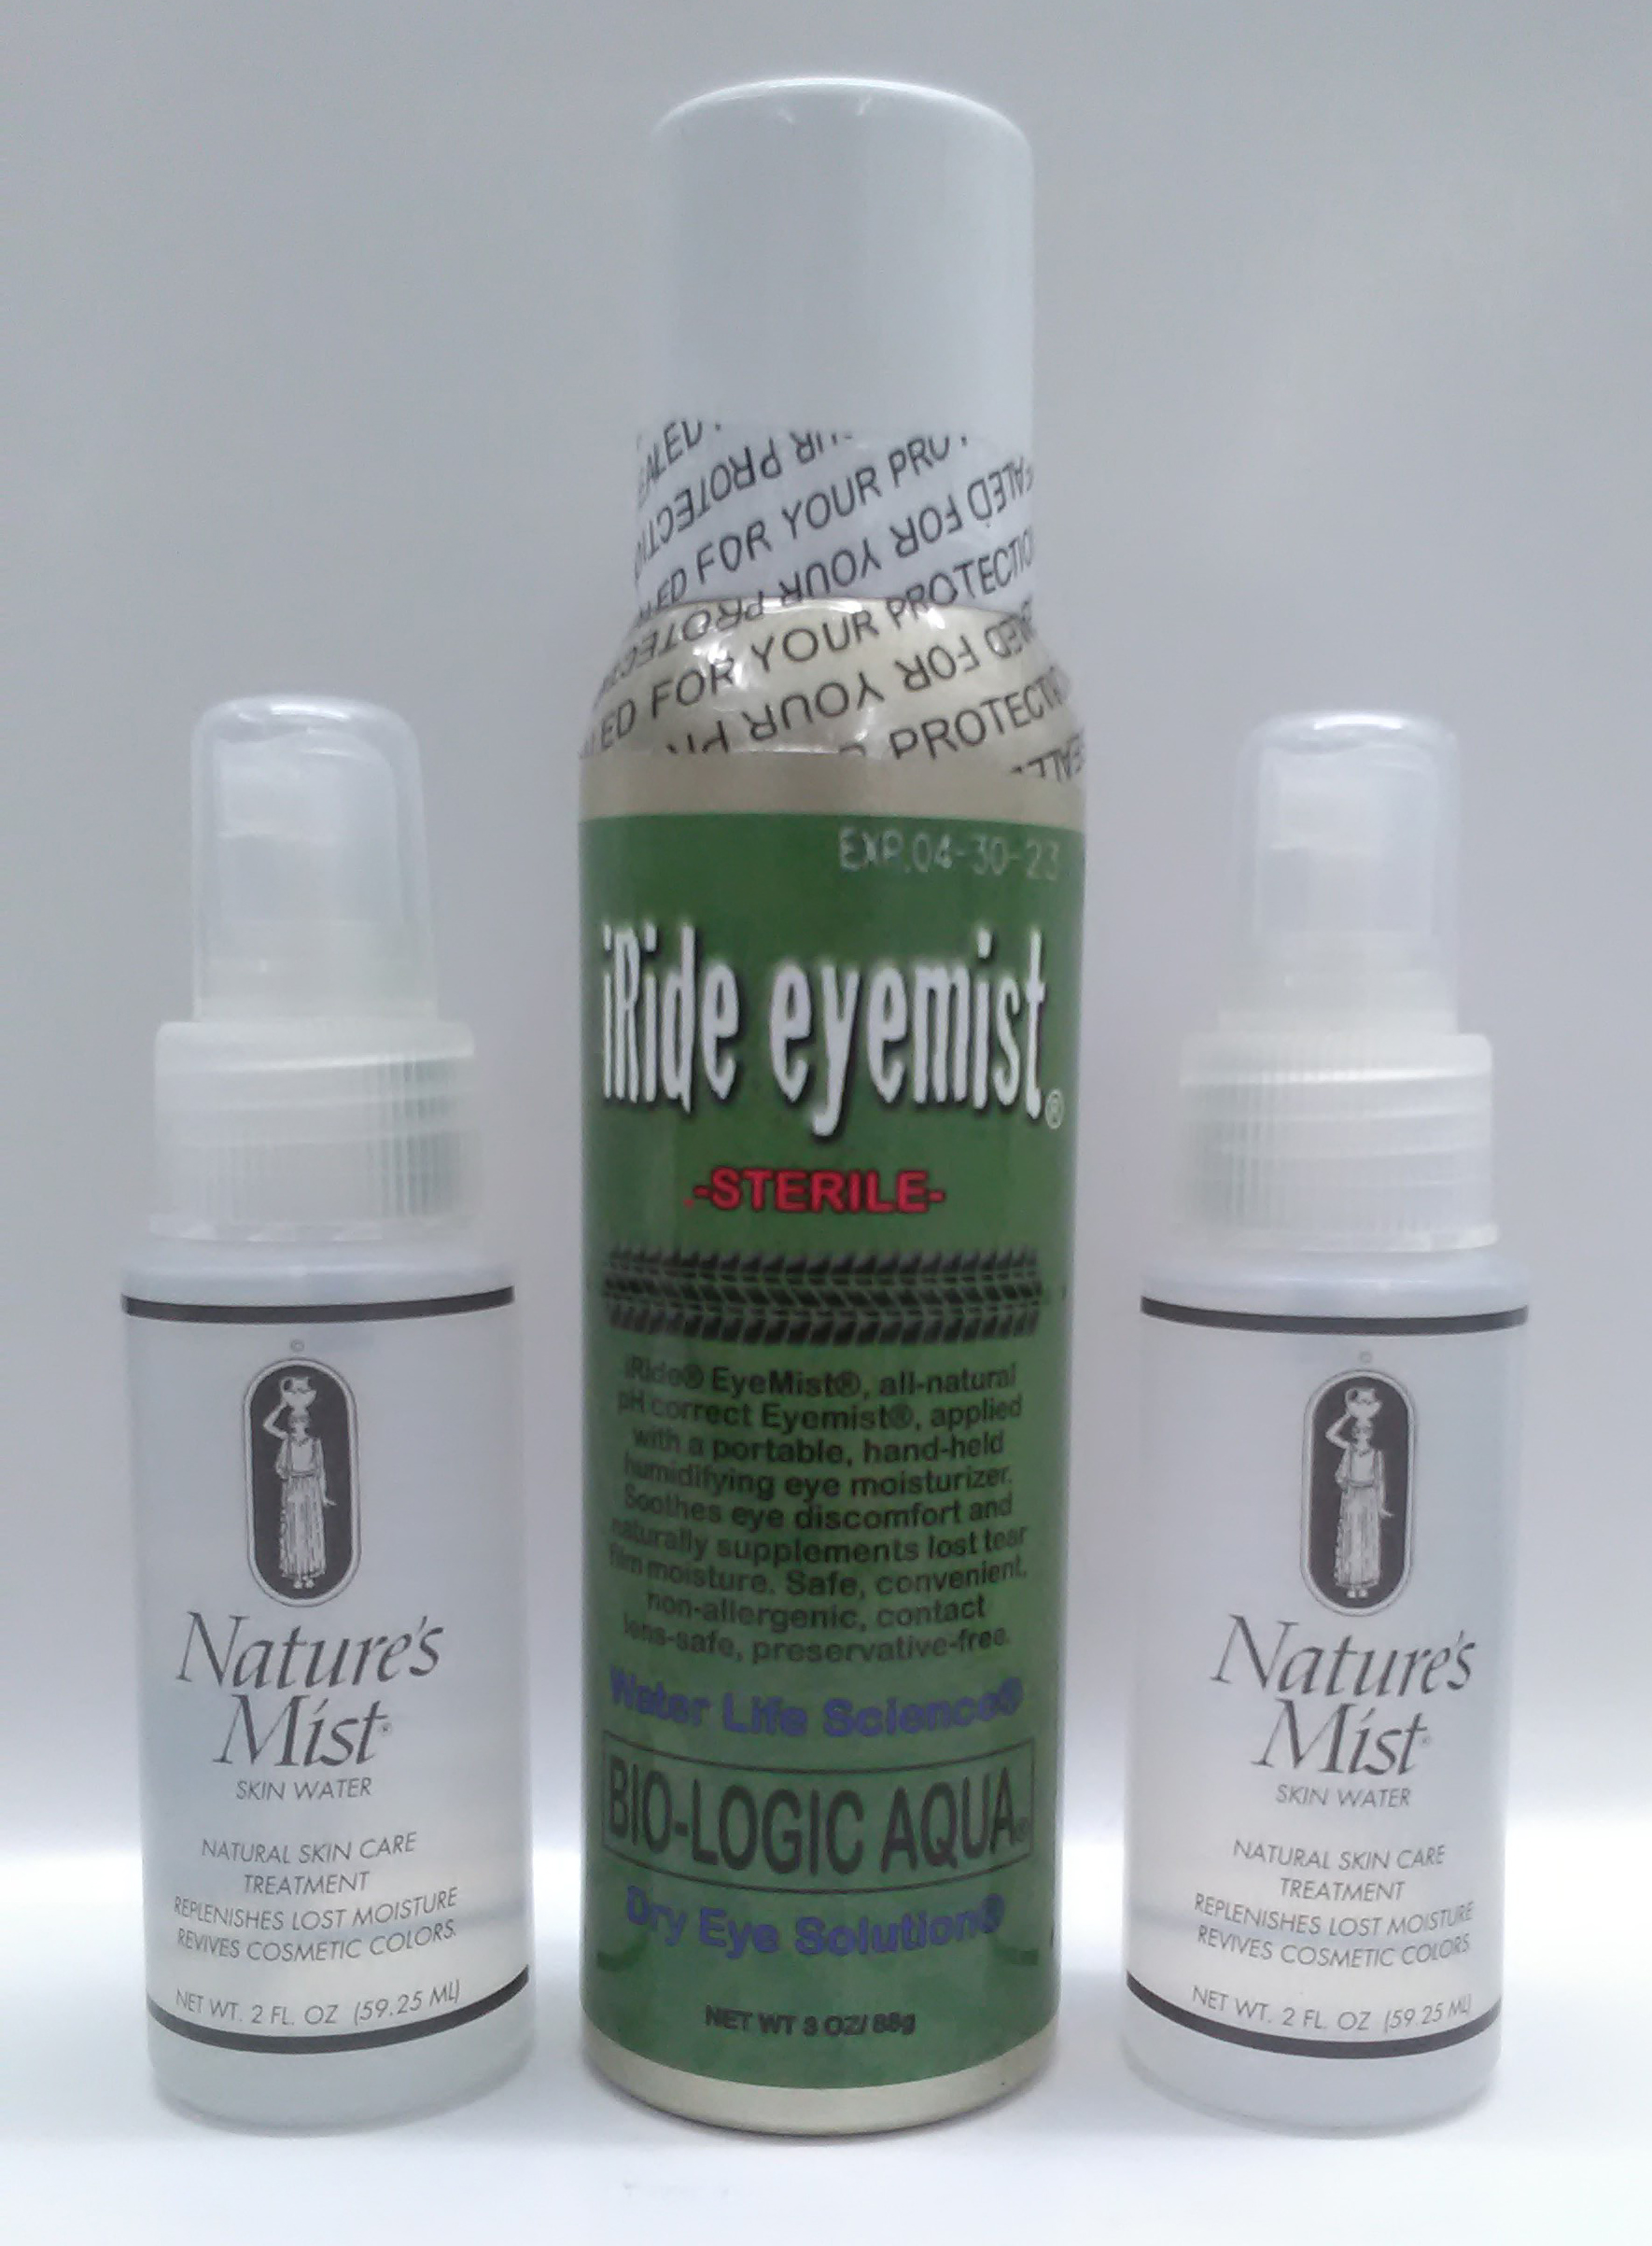 SPECIAL OFFER! Only $6.98! Nature's Mist AND iRide EyeMist!